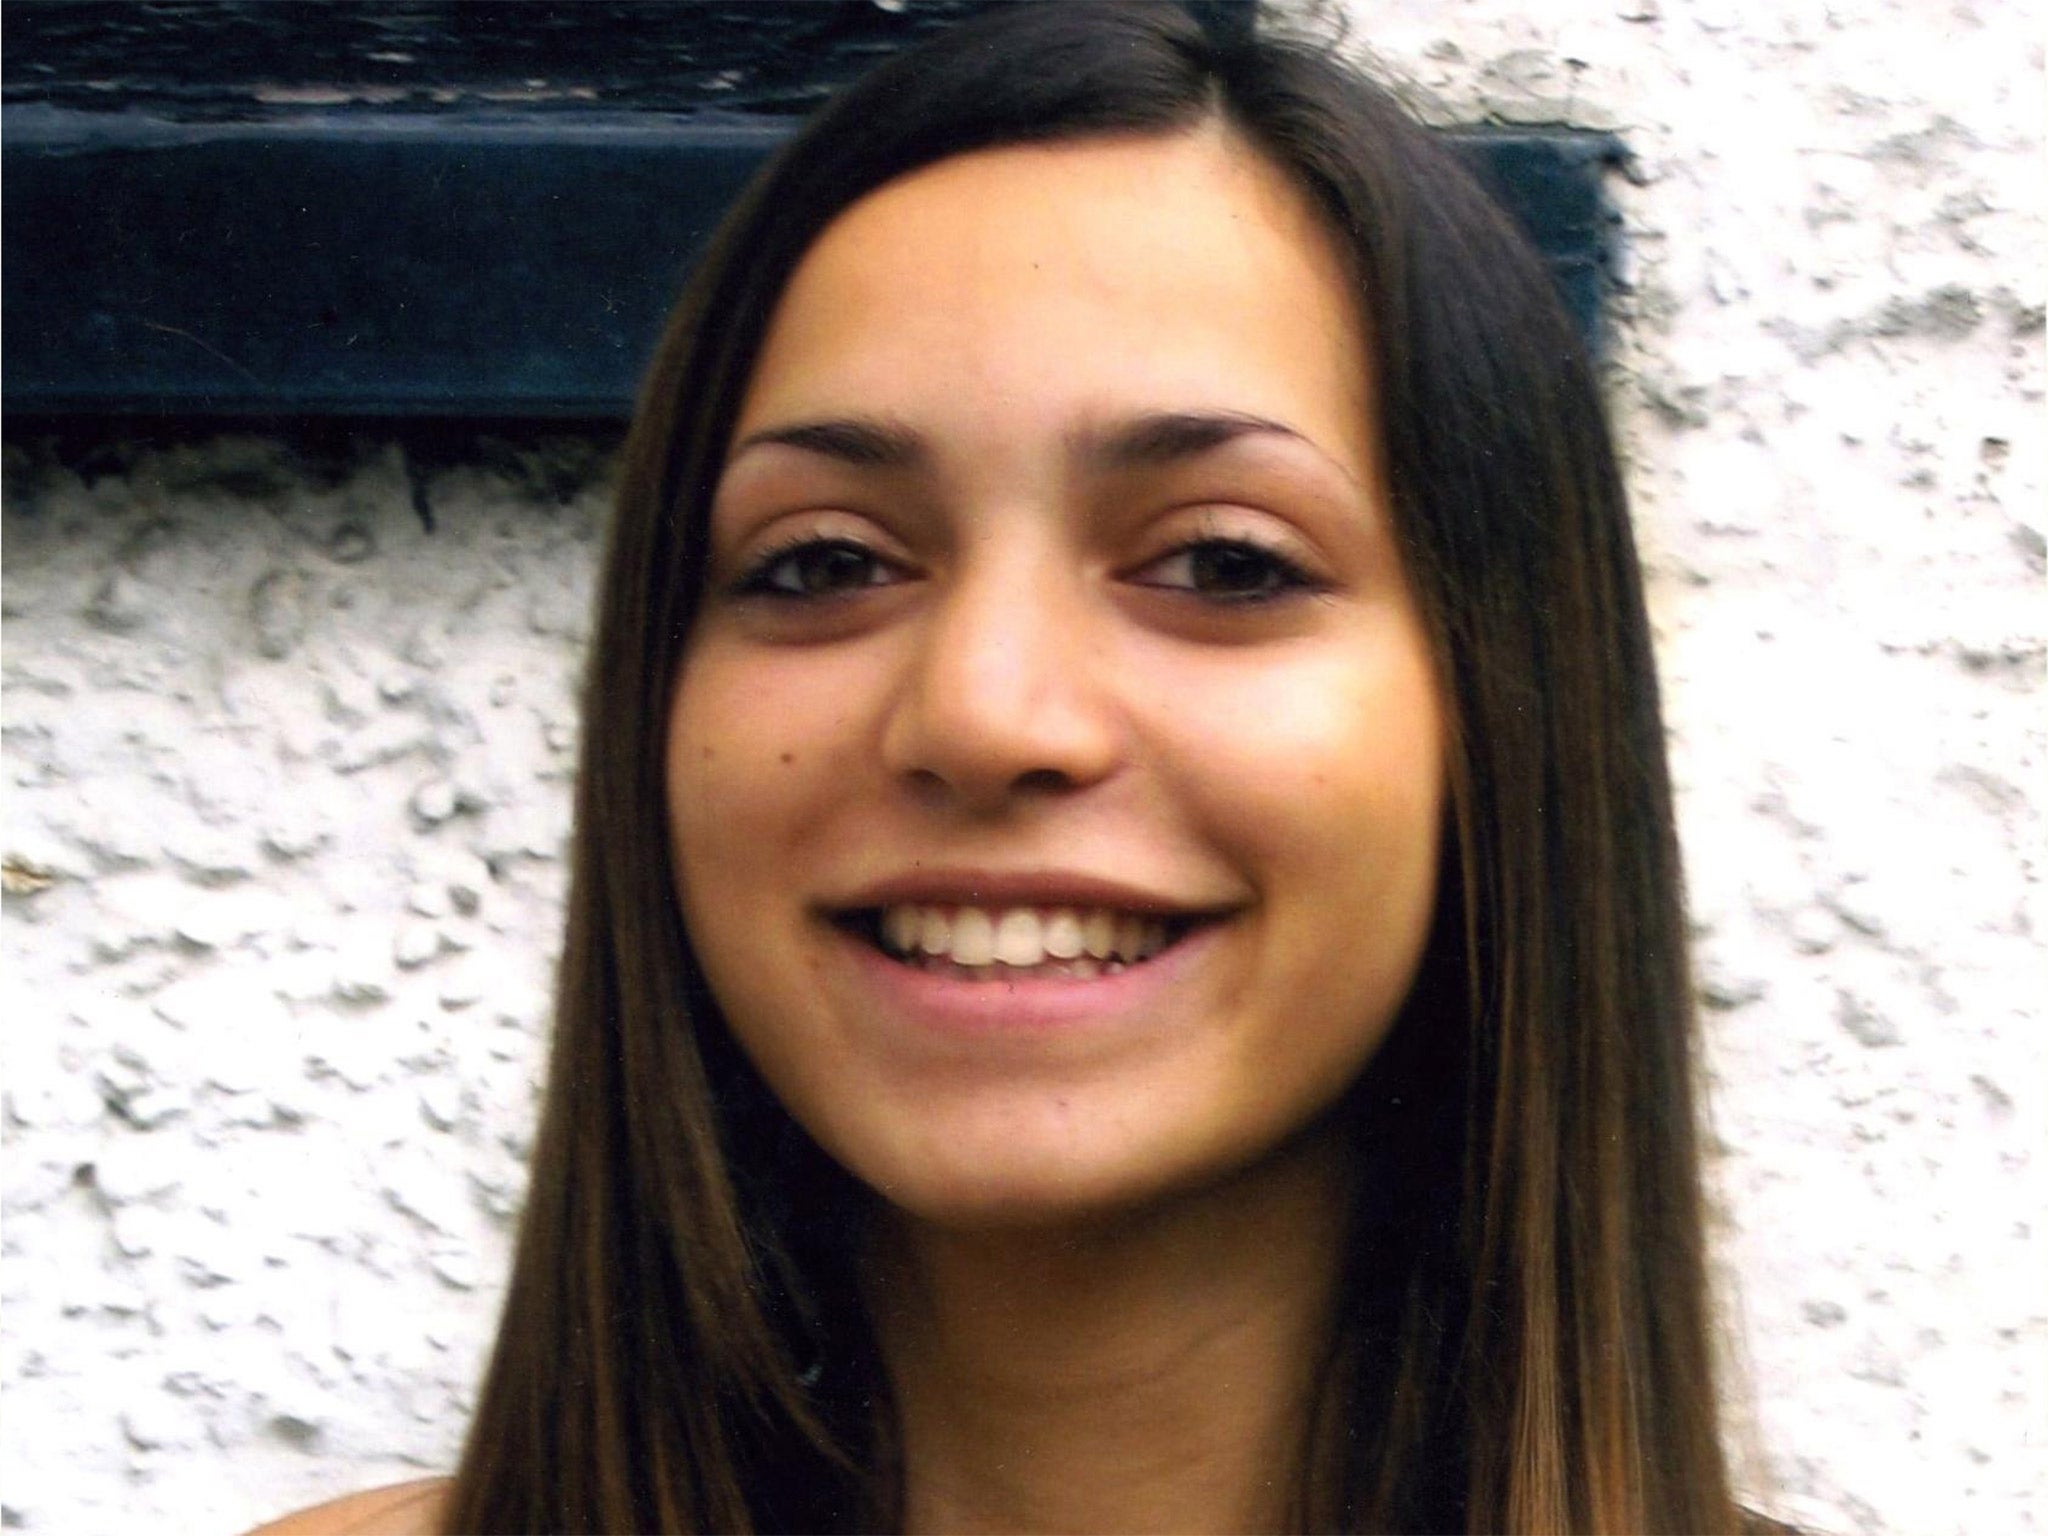 The family of Meredith Kercher wants Amanda Knox to be extradited from the US if her conviction is upheld in Italy